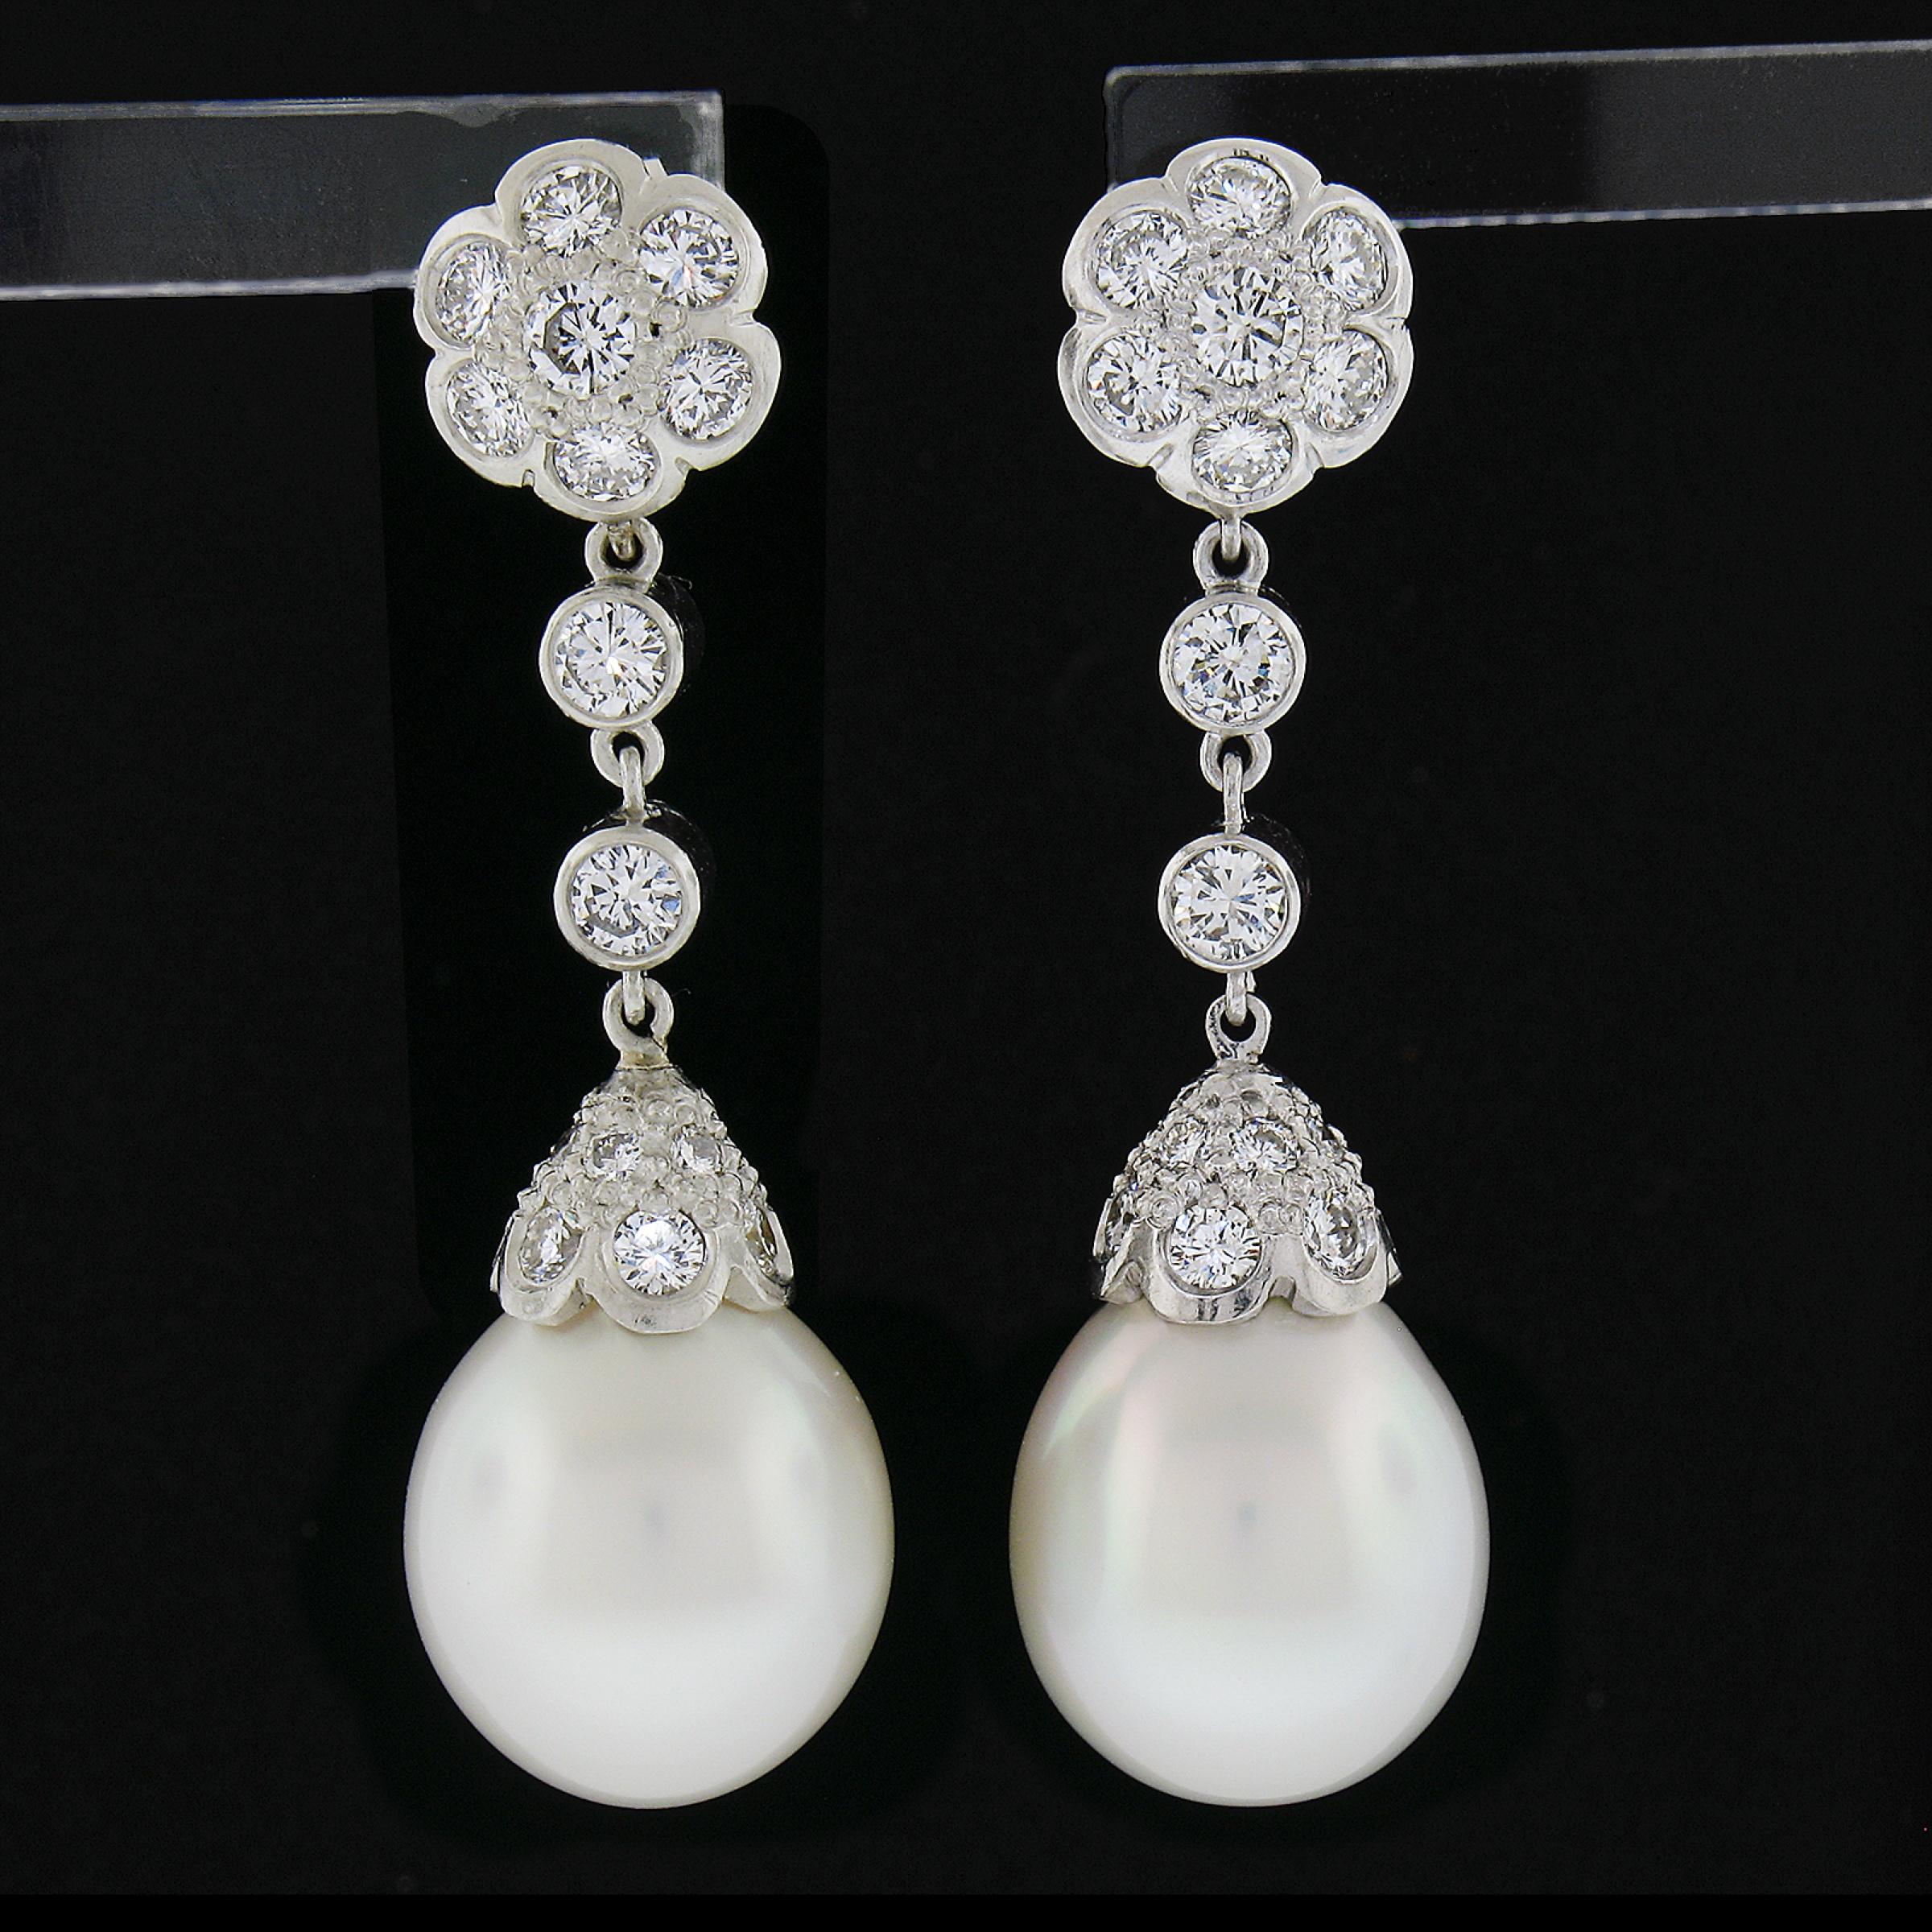 --Stone(s):--
(2) Genuine Cultured South Sea Saltwater Pearls - Drop Shape - White Color w/ Orient Overtones - 12.17mm & 12.24mm (exact - certified)
** See Certification Details Below for Complete Info **
(42) Natural Genuine Diamonds - Round